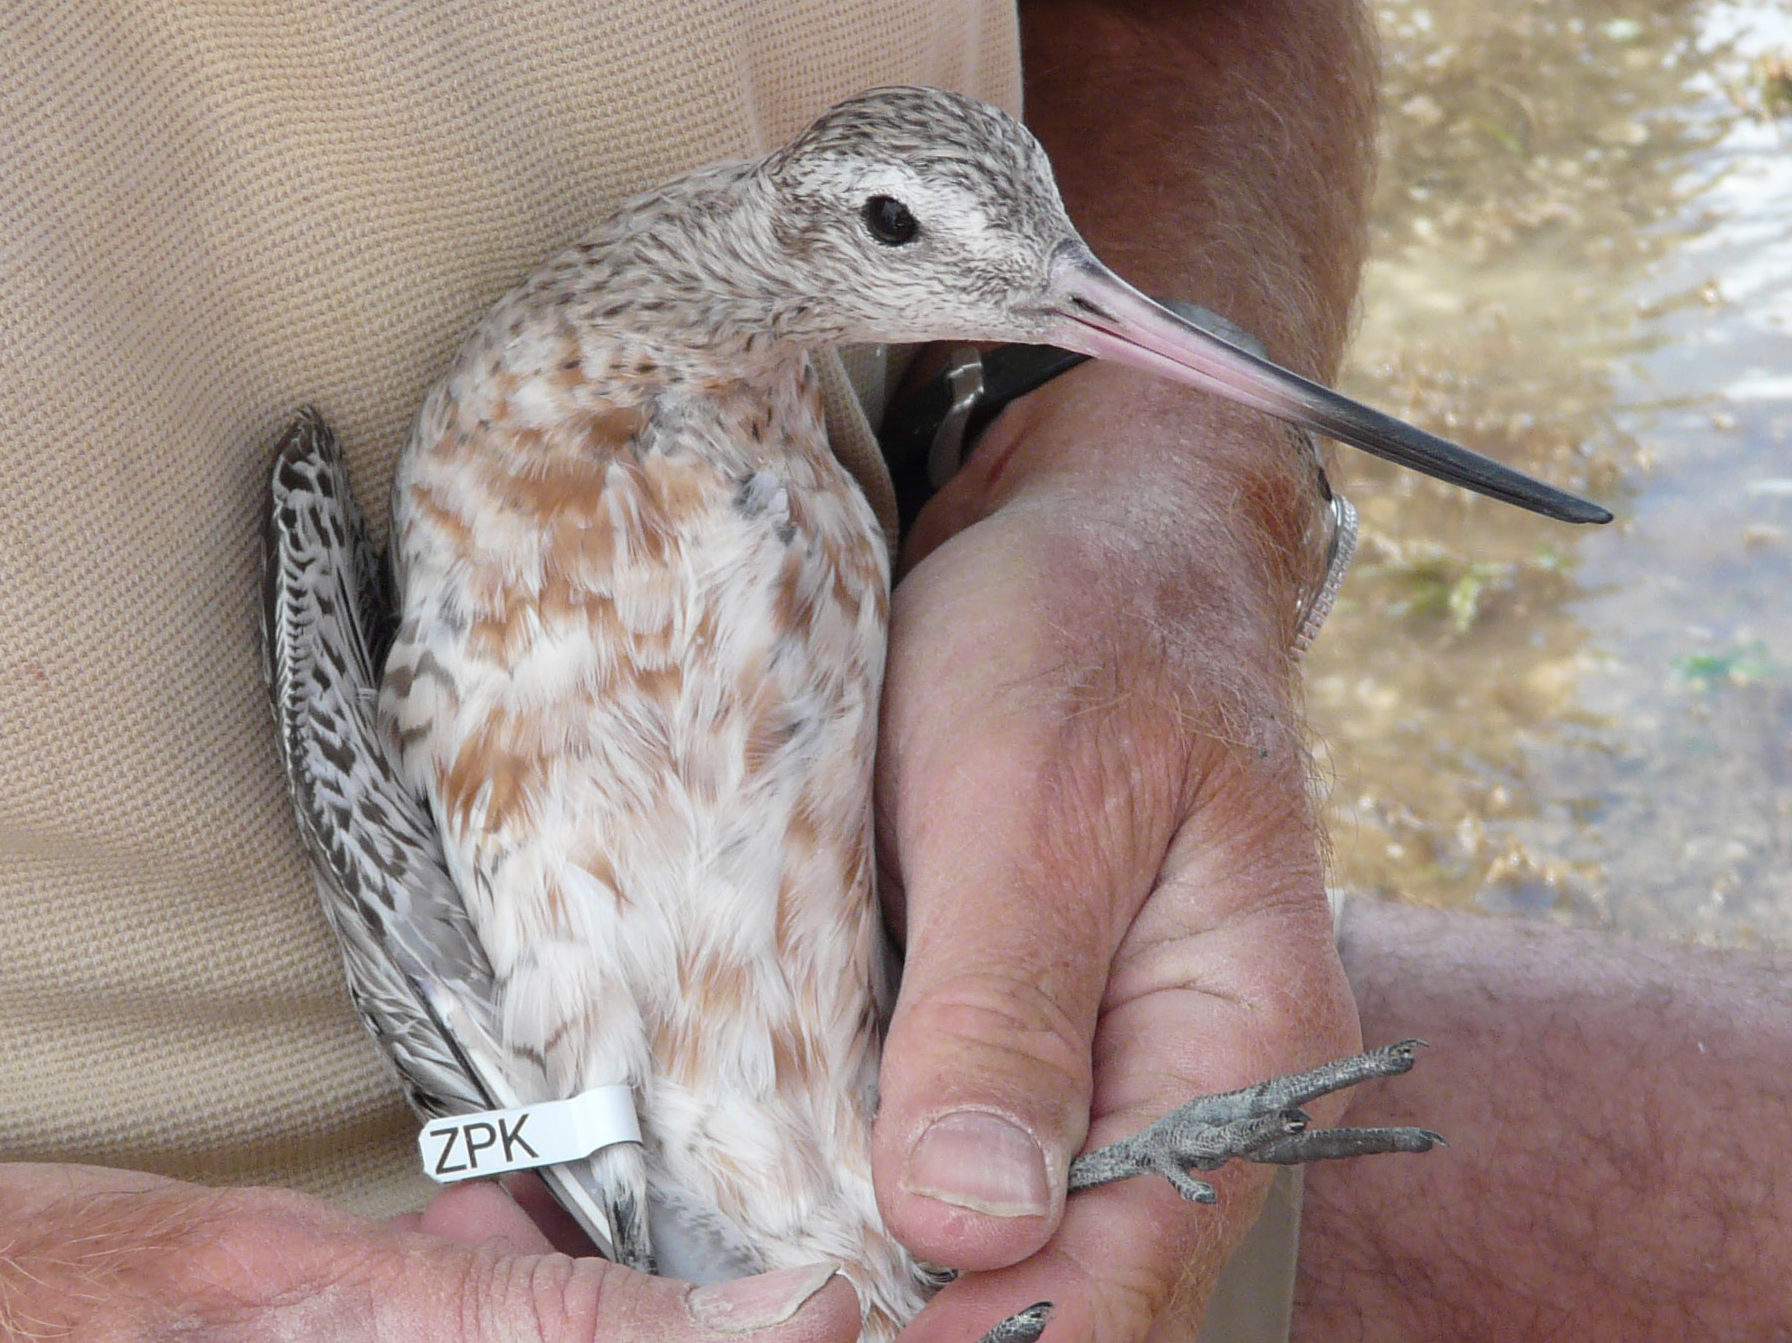 A bar-tailed godwit being held.